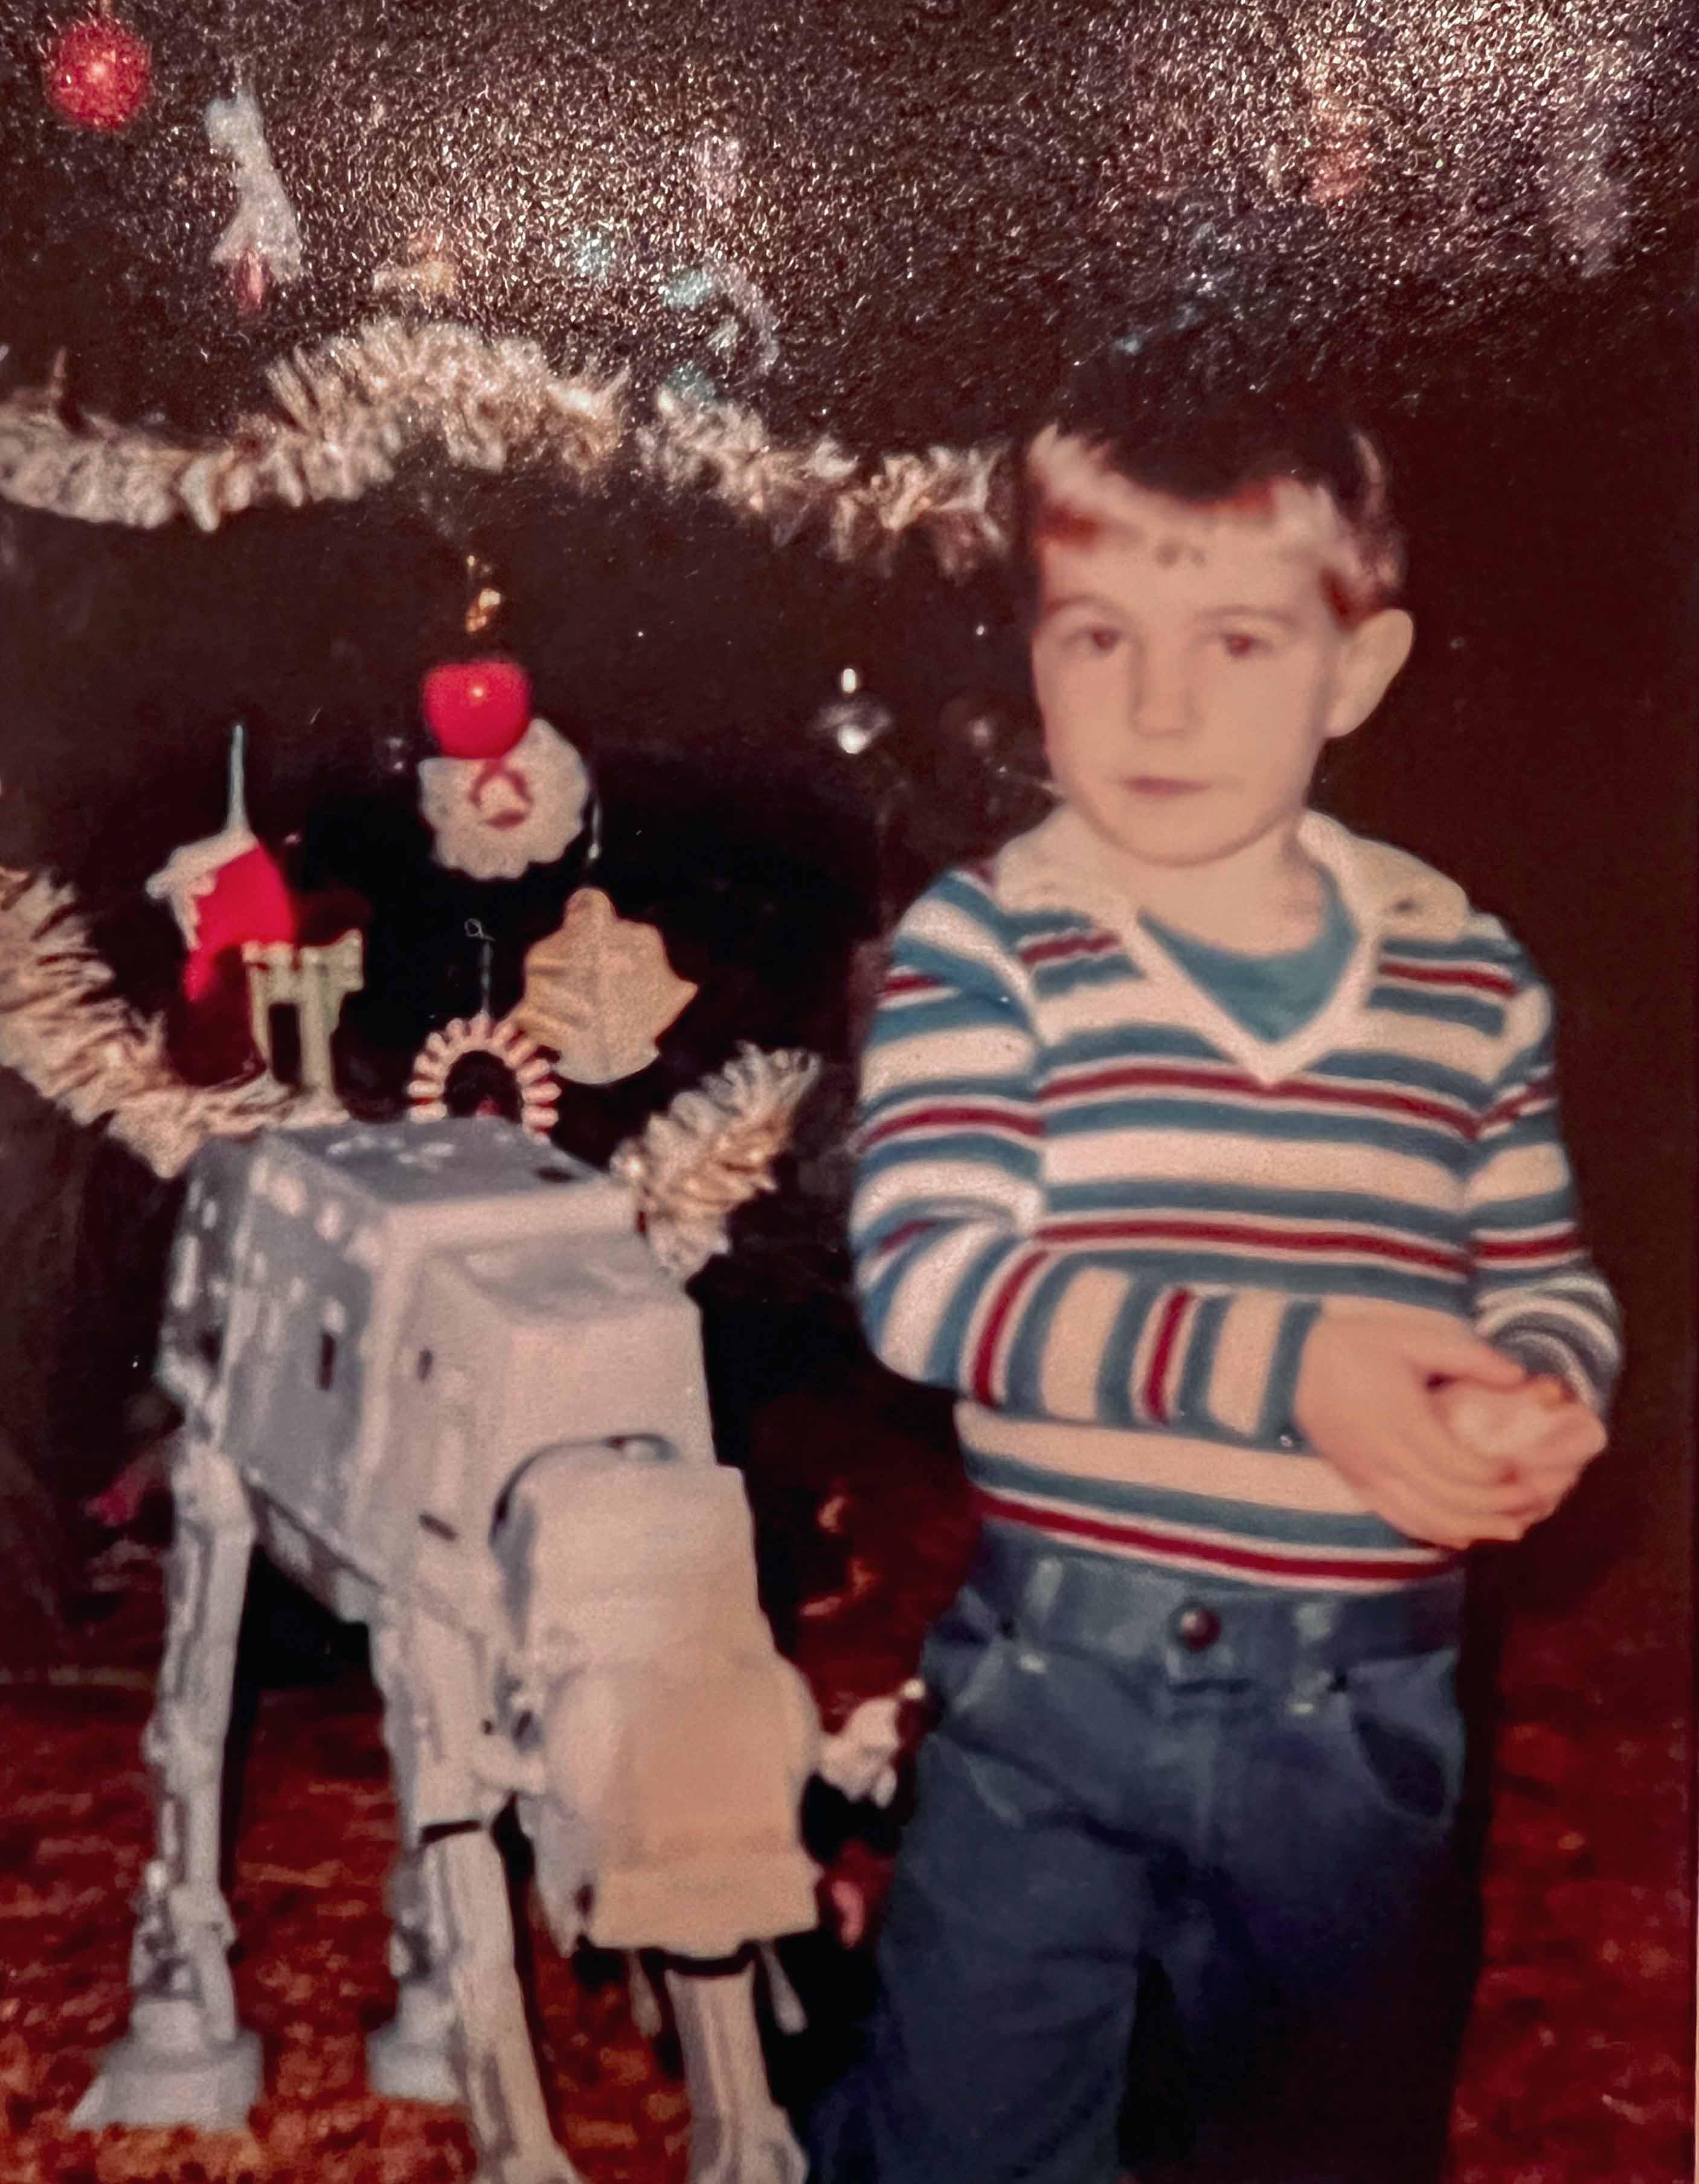 Brian, age 4, during Christmas 1981 with his first Star Wars toys